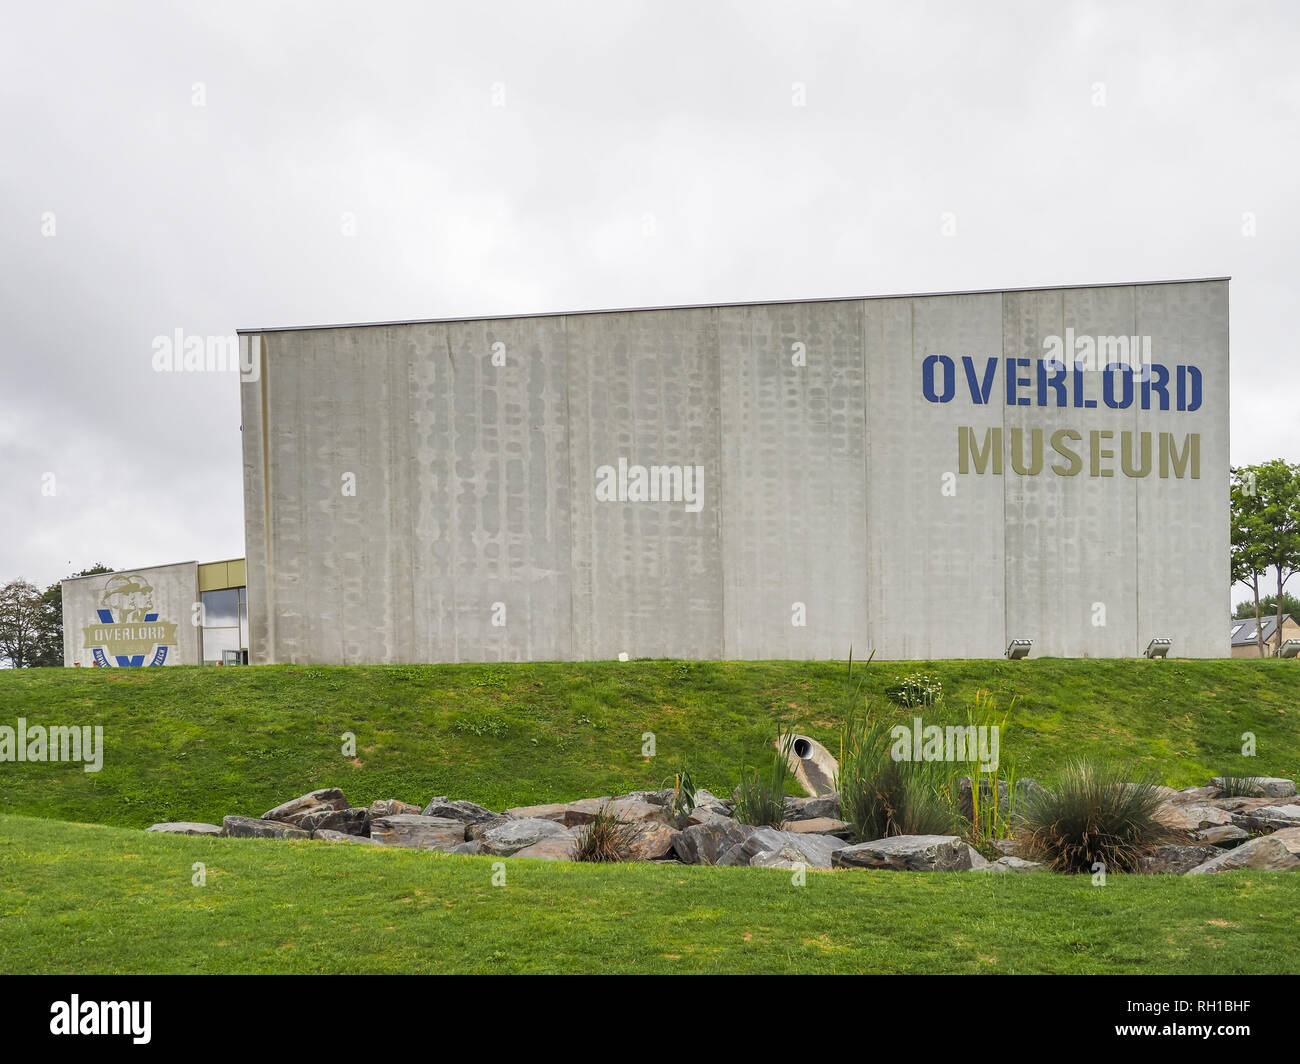 Overlord Museum, Colleville sur Mer, Calvados, Normandiy, France, Europe Stock Photo